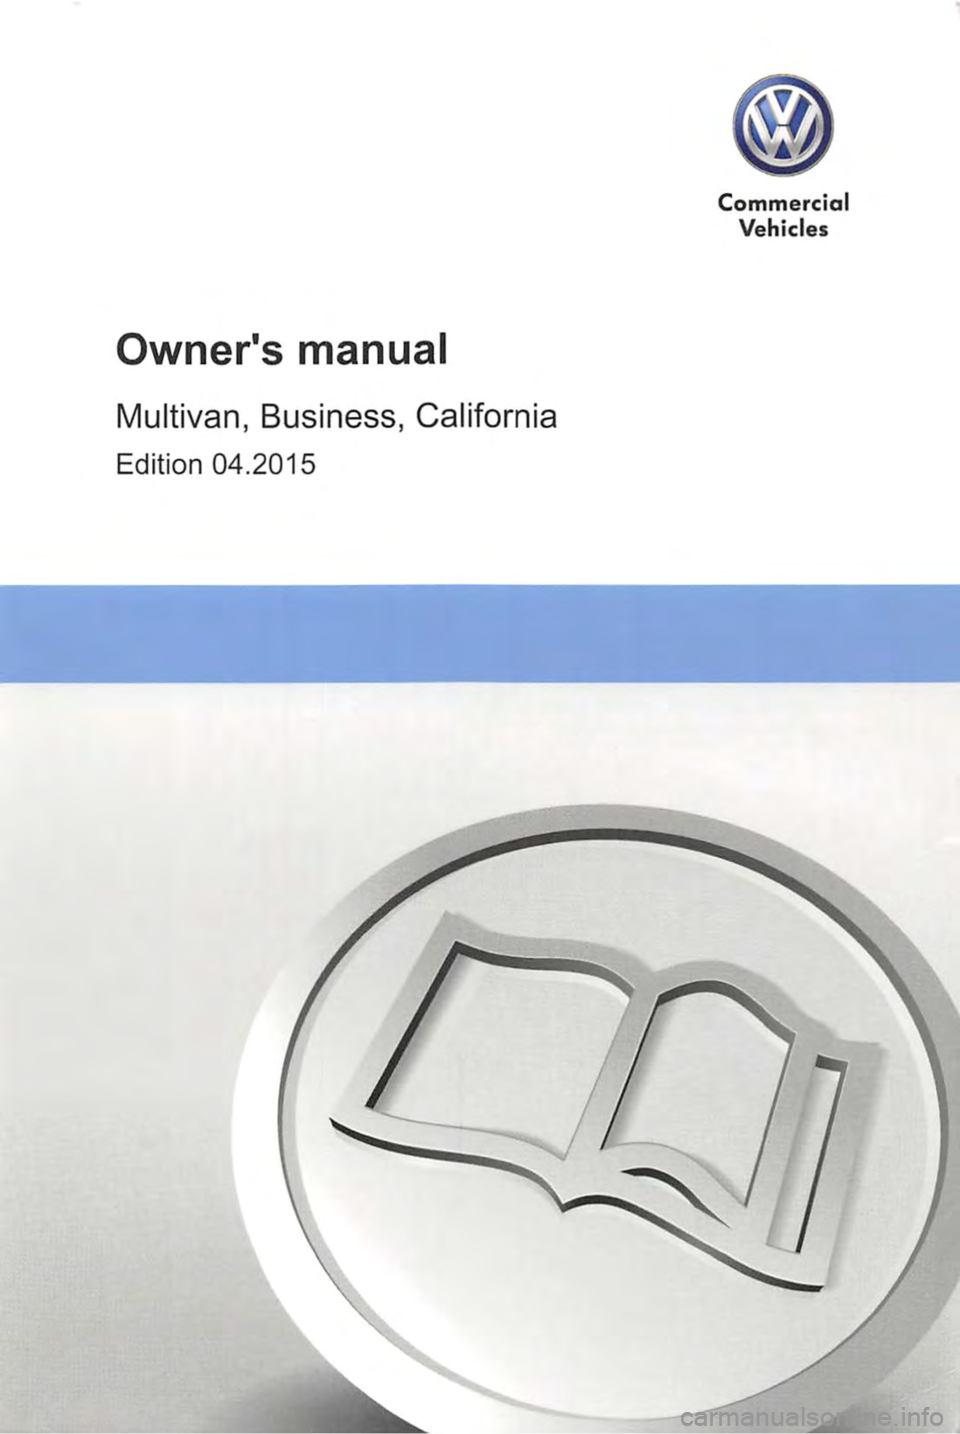 VOLKSWAGEN TRANSPORTER 2019  Owners Manual Owners manual 
Multivan, Business, California 
Edition 04.2015 
Commercial 
Vehicles  